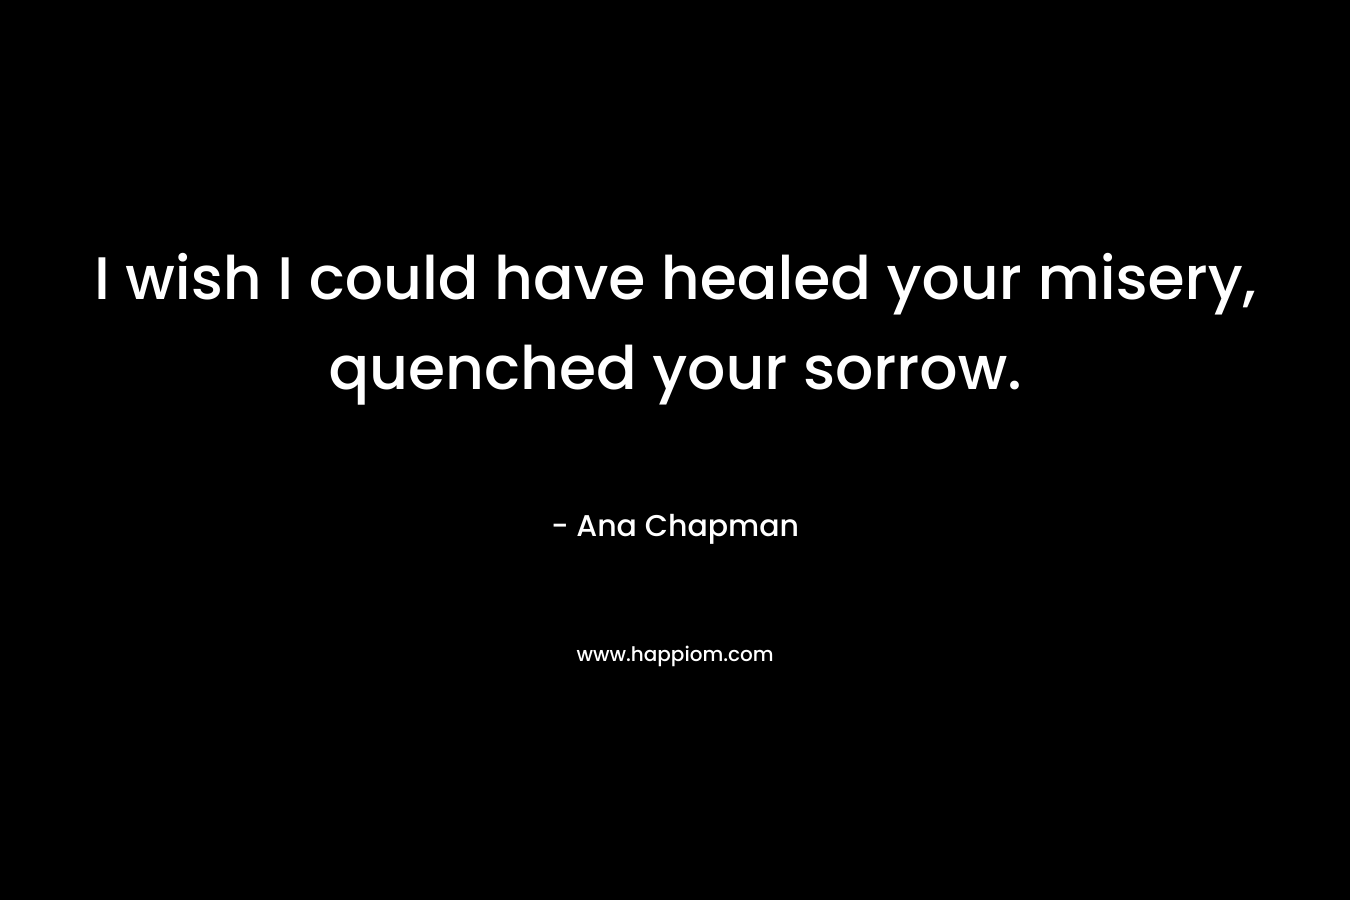 I wish I could have healed your misery, quenched your sorrow. – Ana Chapman